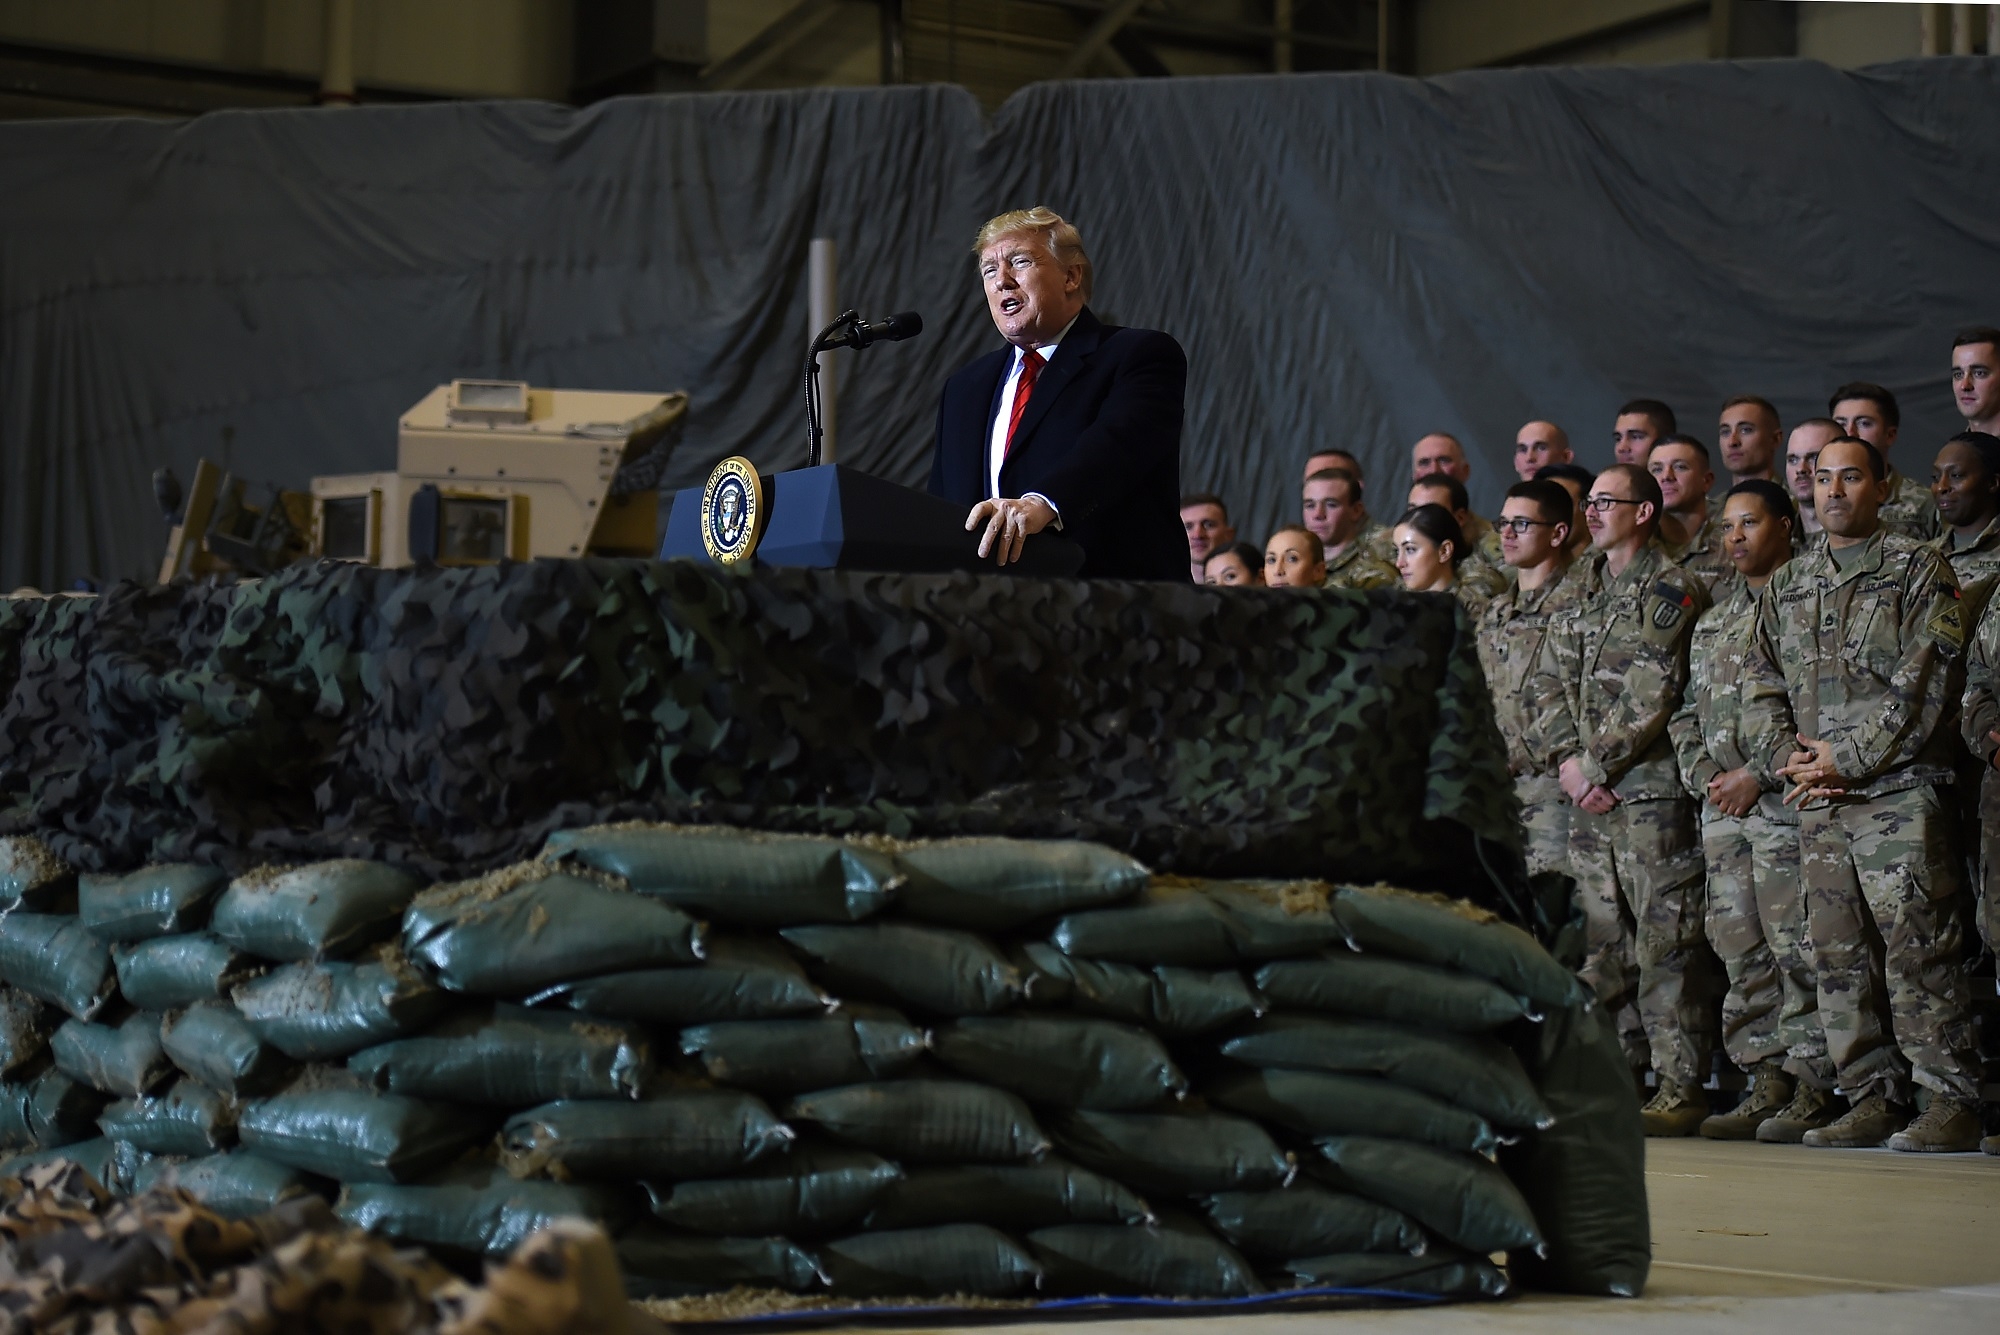 Donald Trump during a visit to US troops in Afghanistan in November 2019